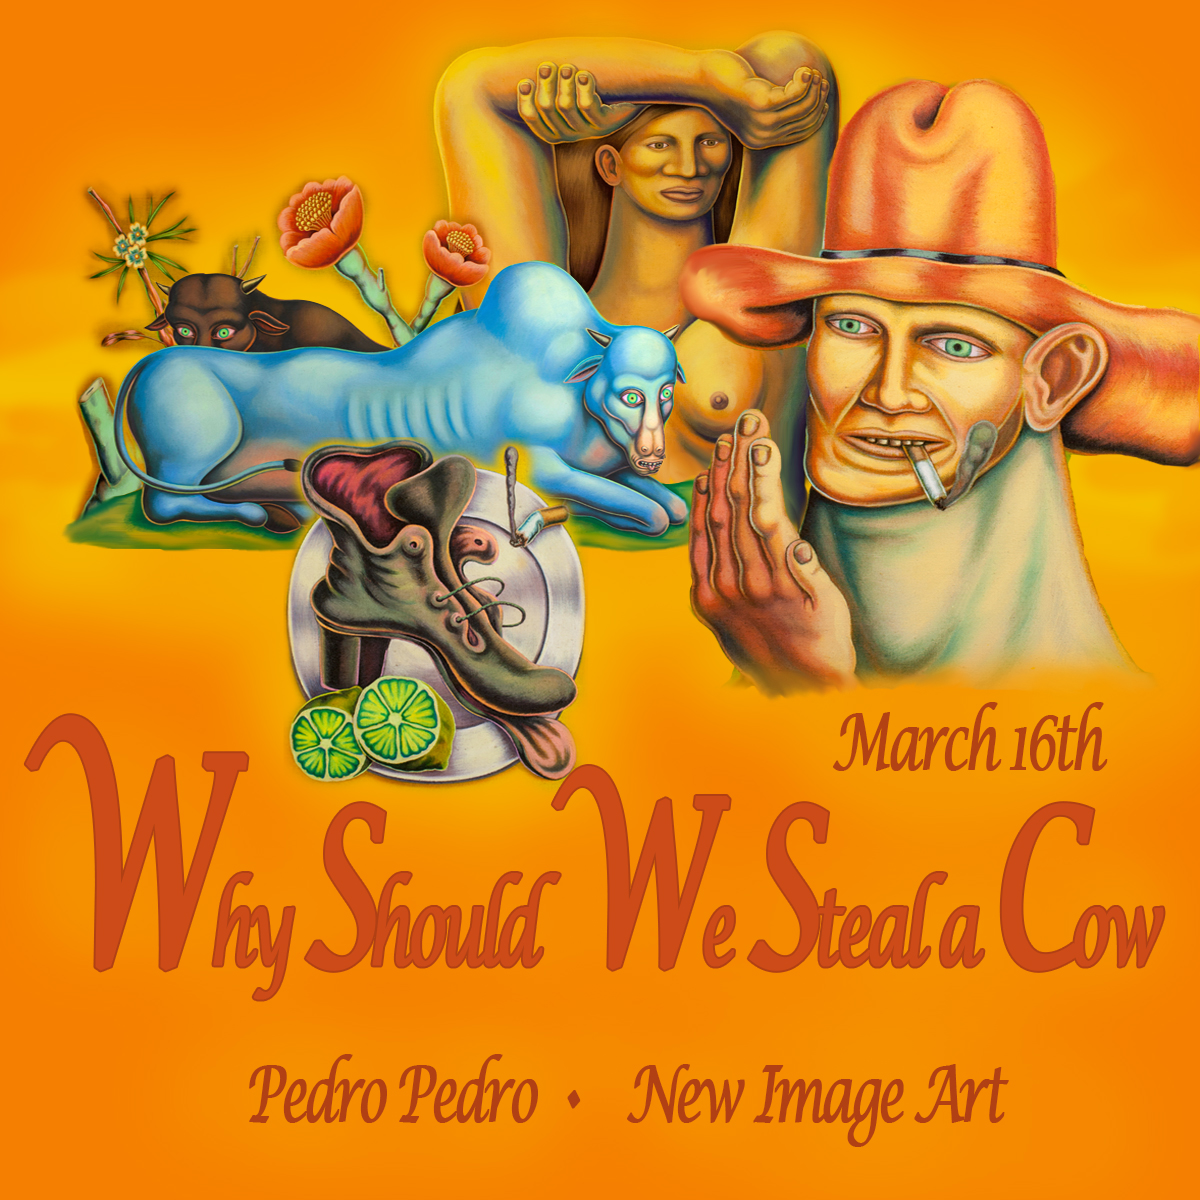 PEDRO PEDRO - WHY SHOULD WE STEAL A COW?